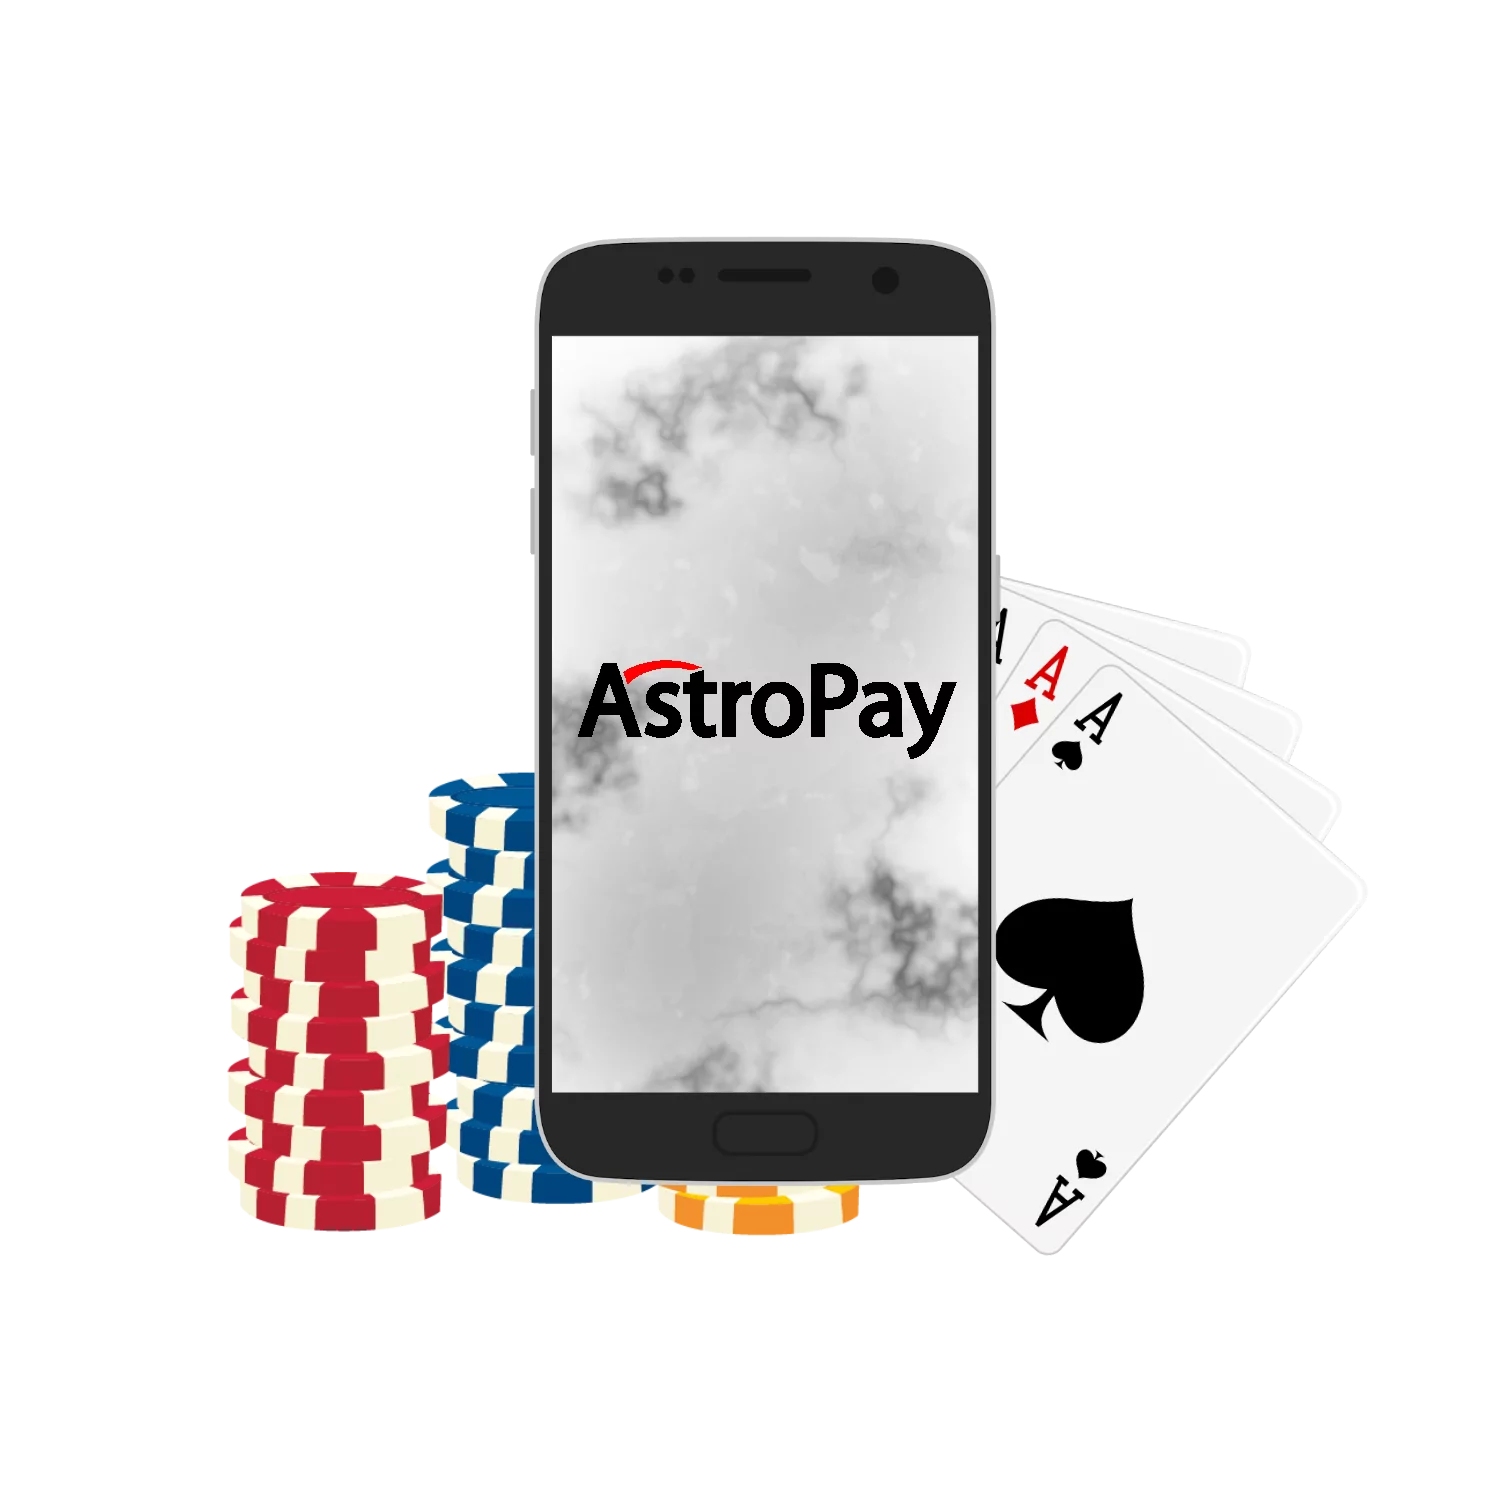 Astropay is very popular in India and is safe enough for using in at online casinos.